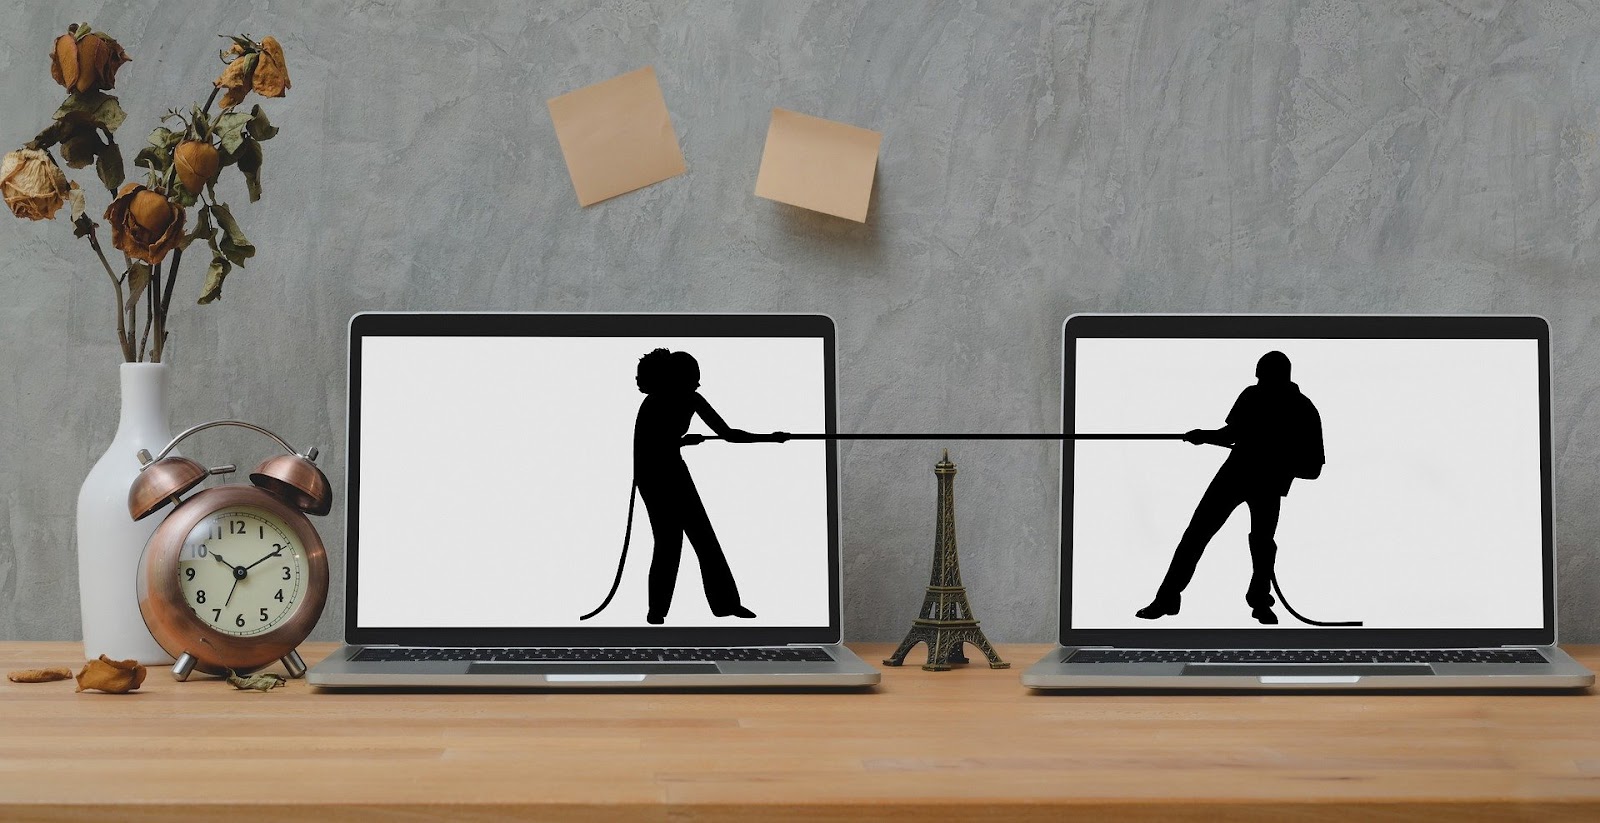 A picture of two laptop computers. There's a silhouette of a woman on the left screen and a  silhouette of a man on the right screen. They're having a tug of war between the two screens.